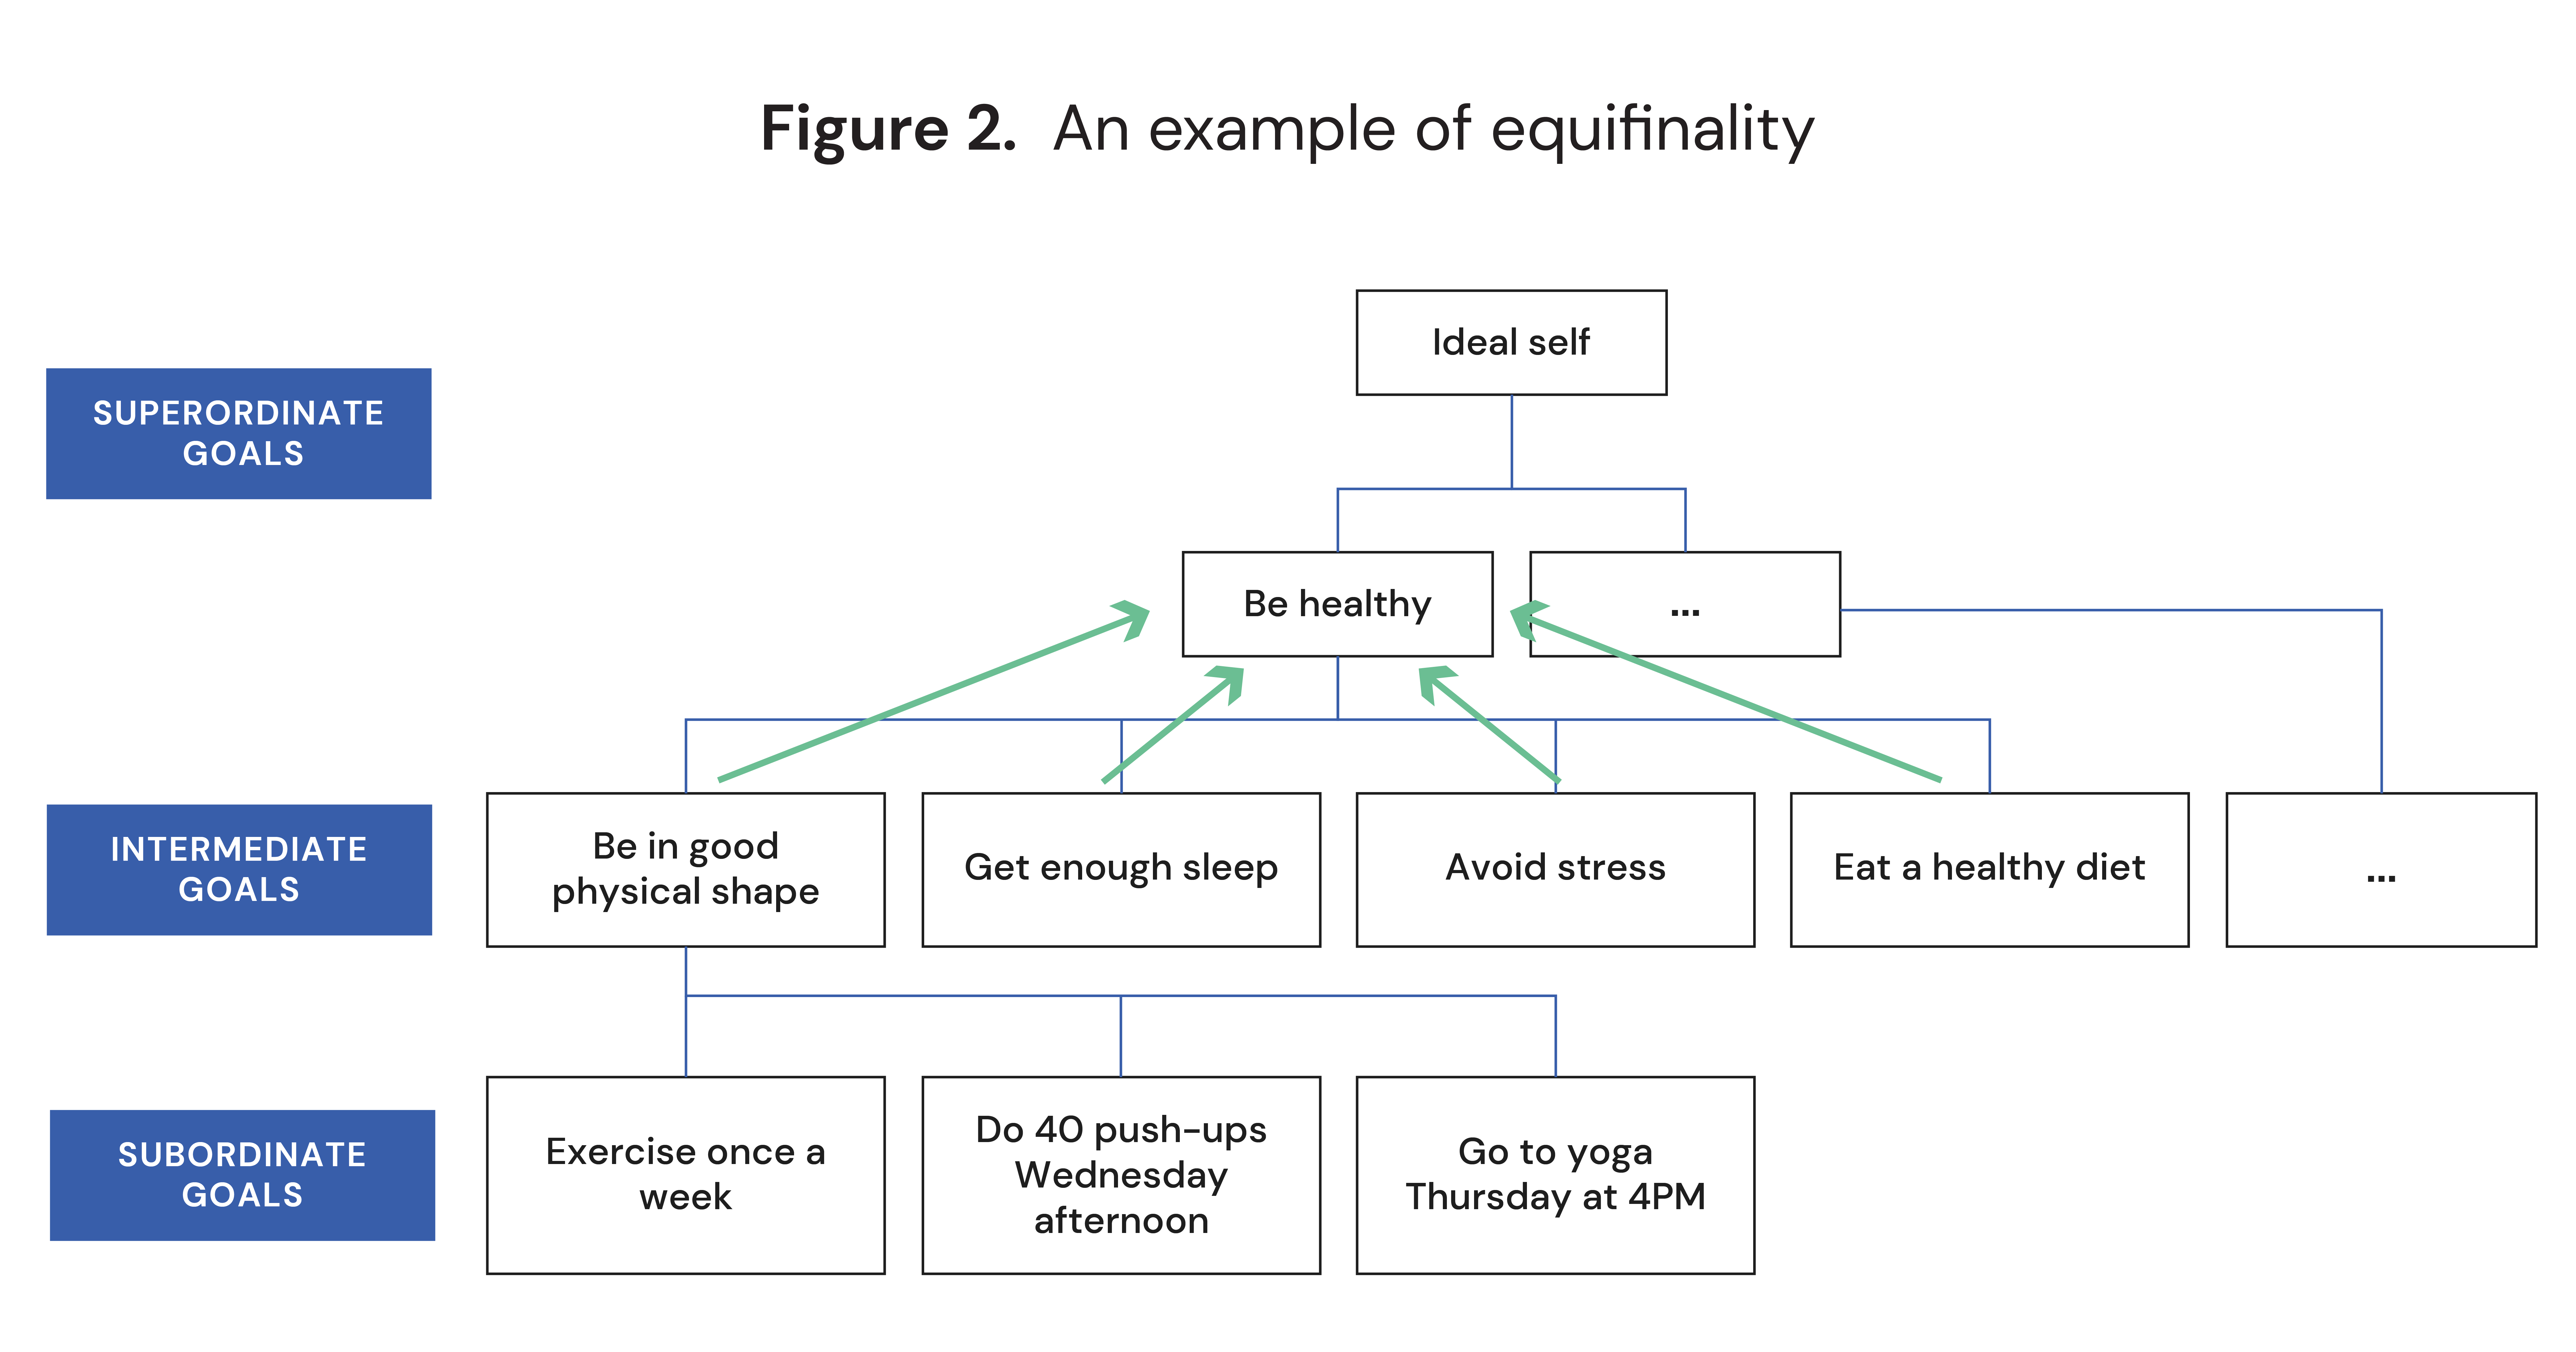 An example of equifinality in a goal hierarchy 